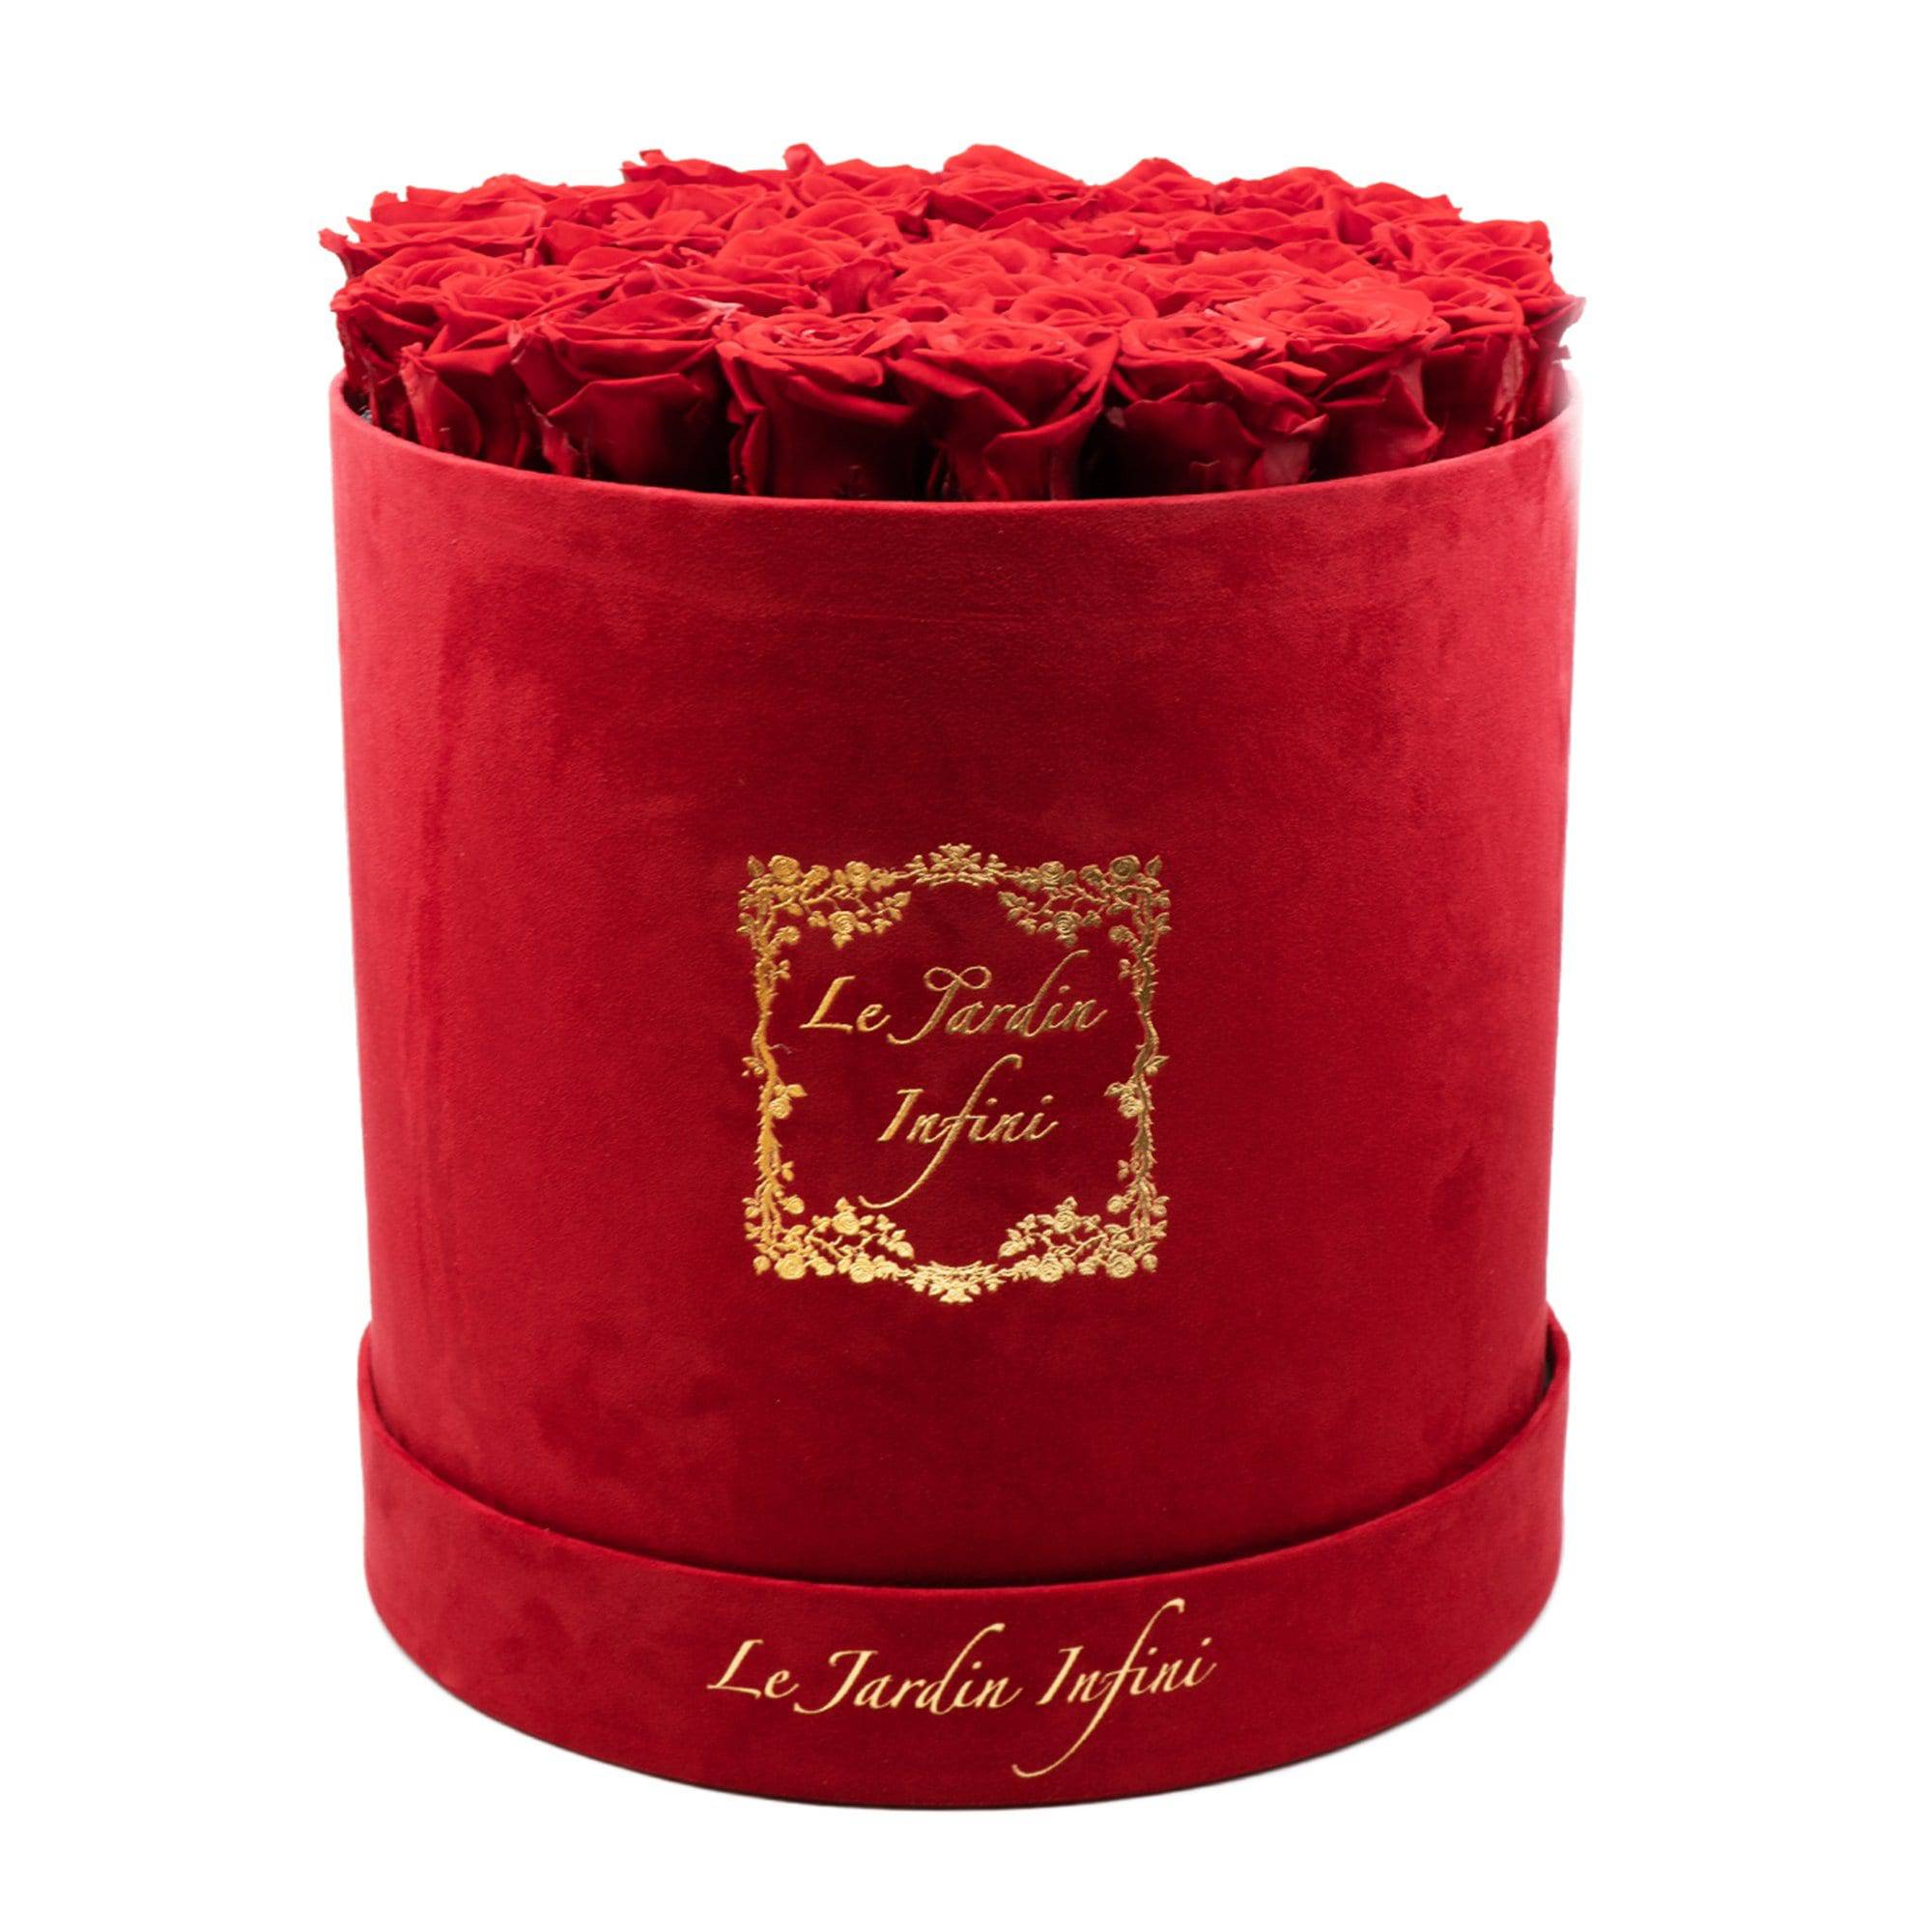 Red Preserved Roses - Large Round Luxury Red Suede Box - Le Jardin Infini Roses in a Box